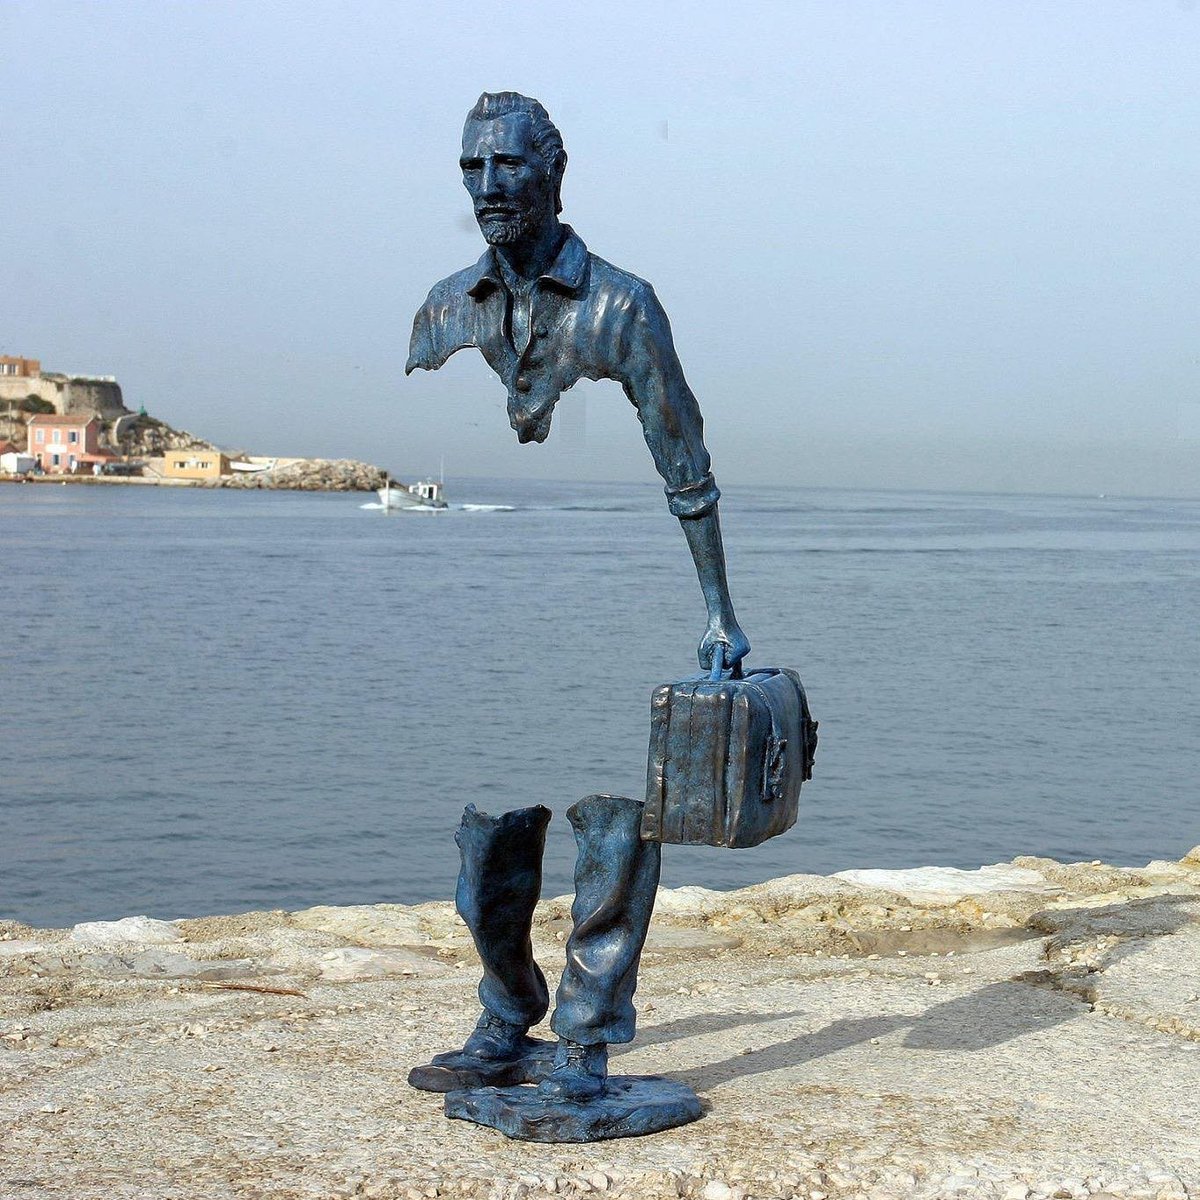 12. This sculpture by Bruno Catalano portrays the profound emptiness experienced by migrants as they depart from their homeland—leaving their loved ones and their community behind—in pursuit of a better life.